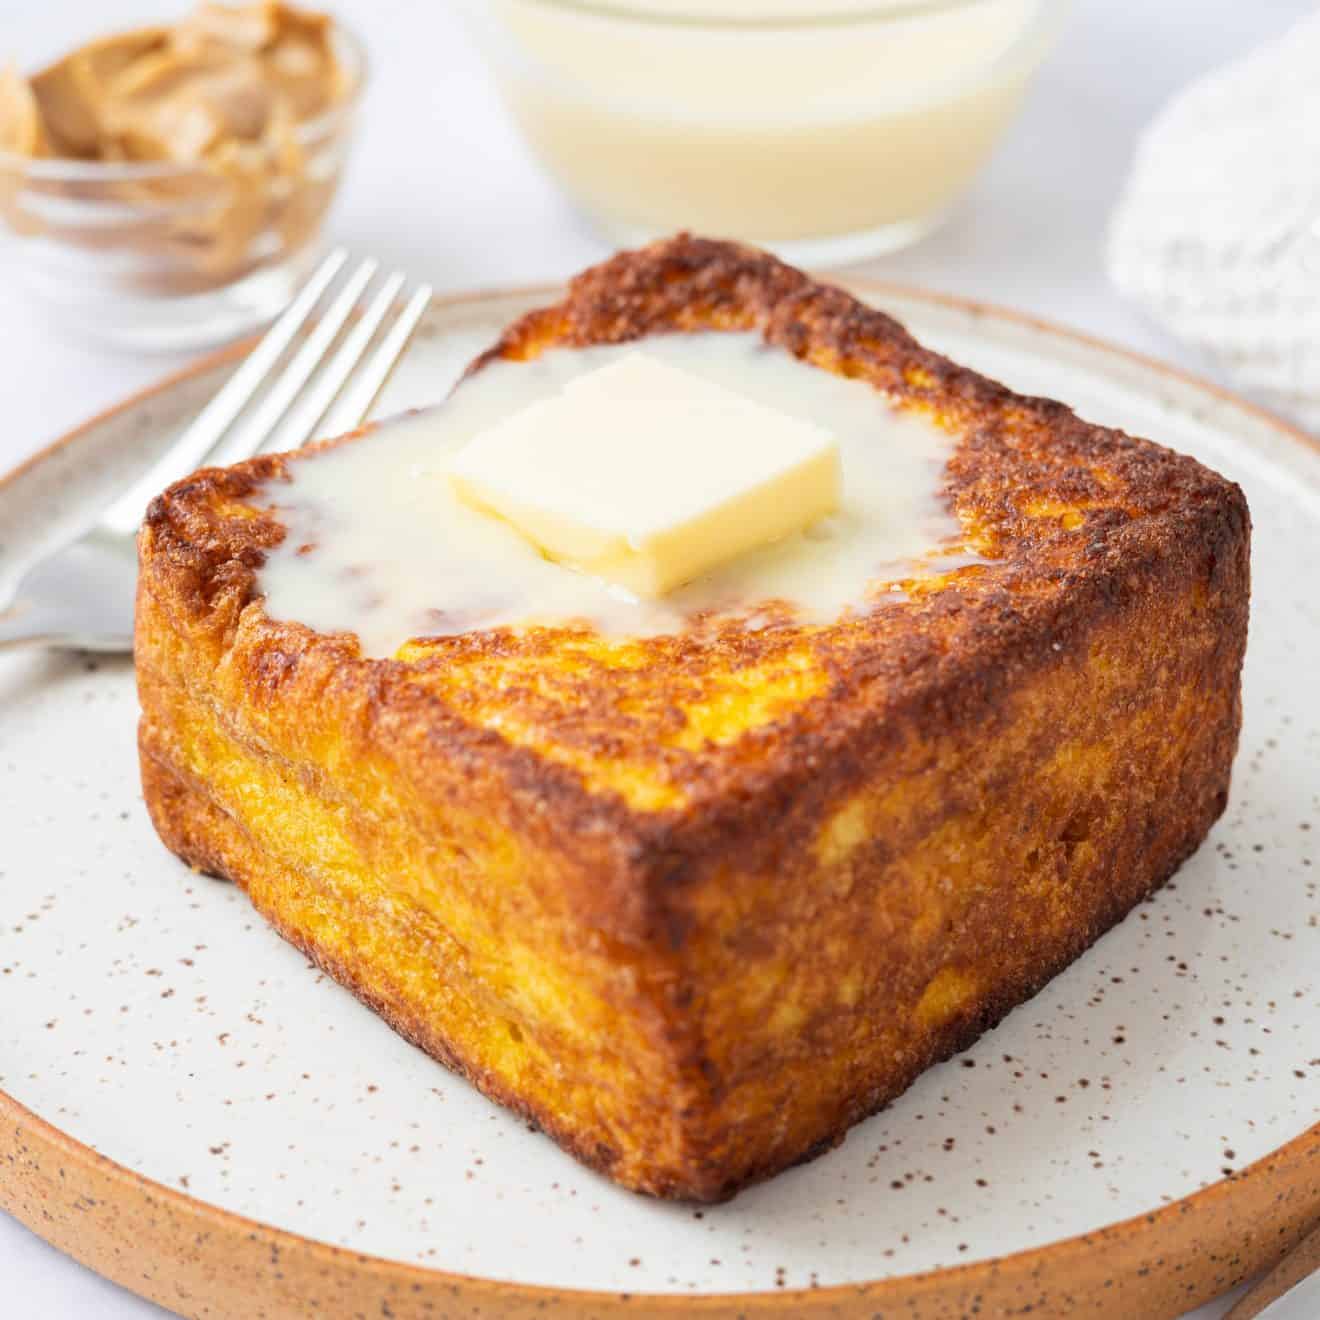 10-min. Easy Hong Kong Style French Toast - Christie at Home